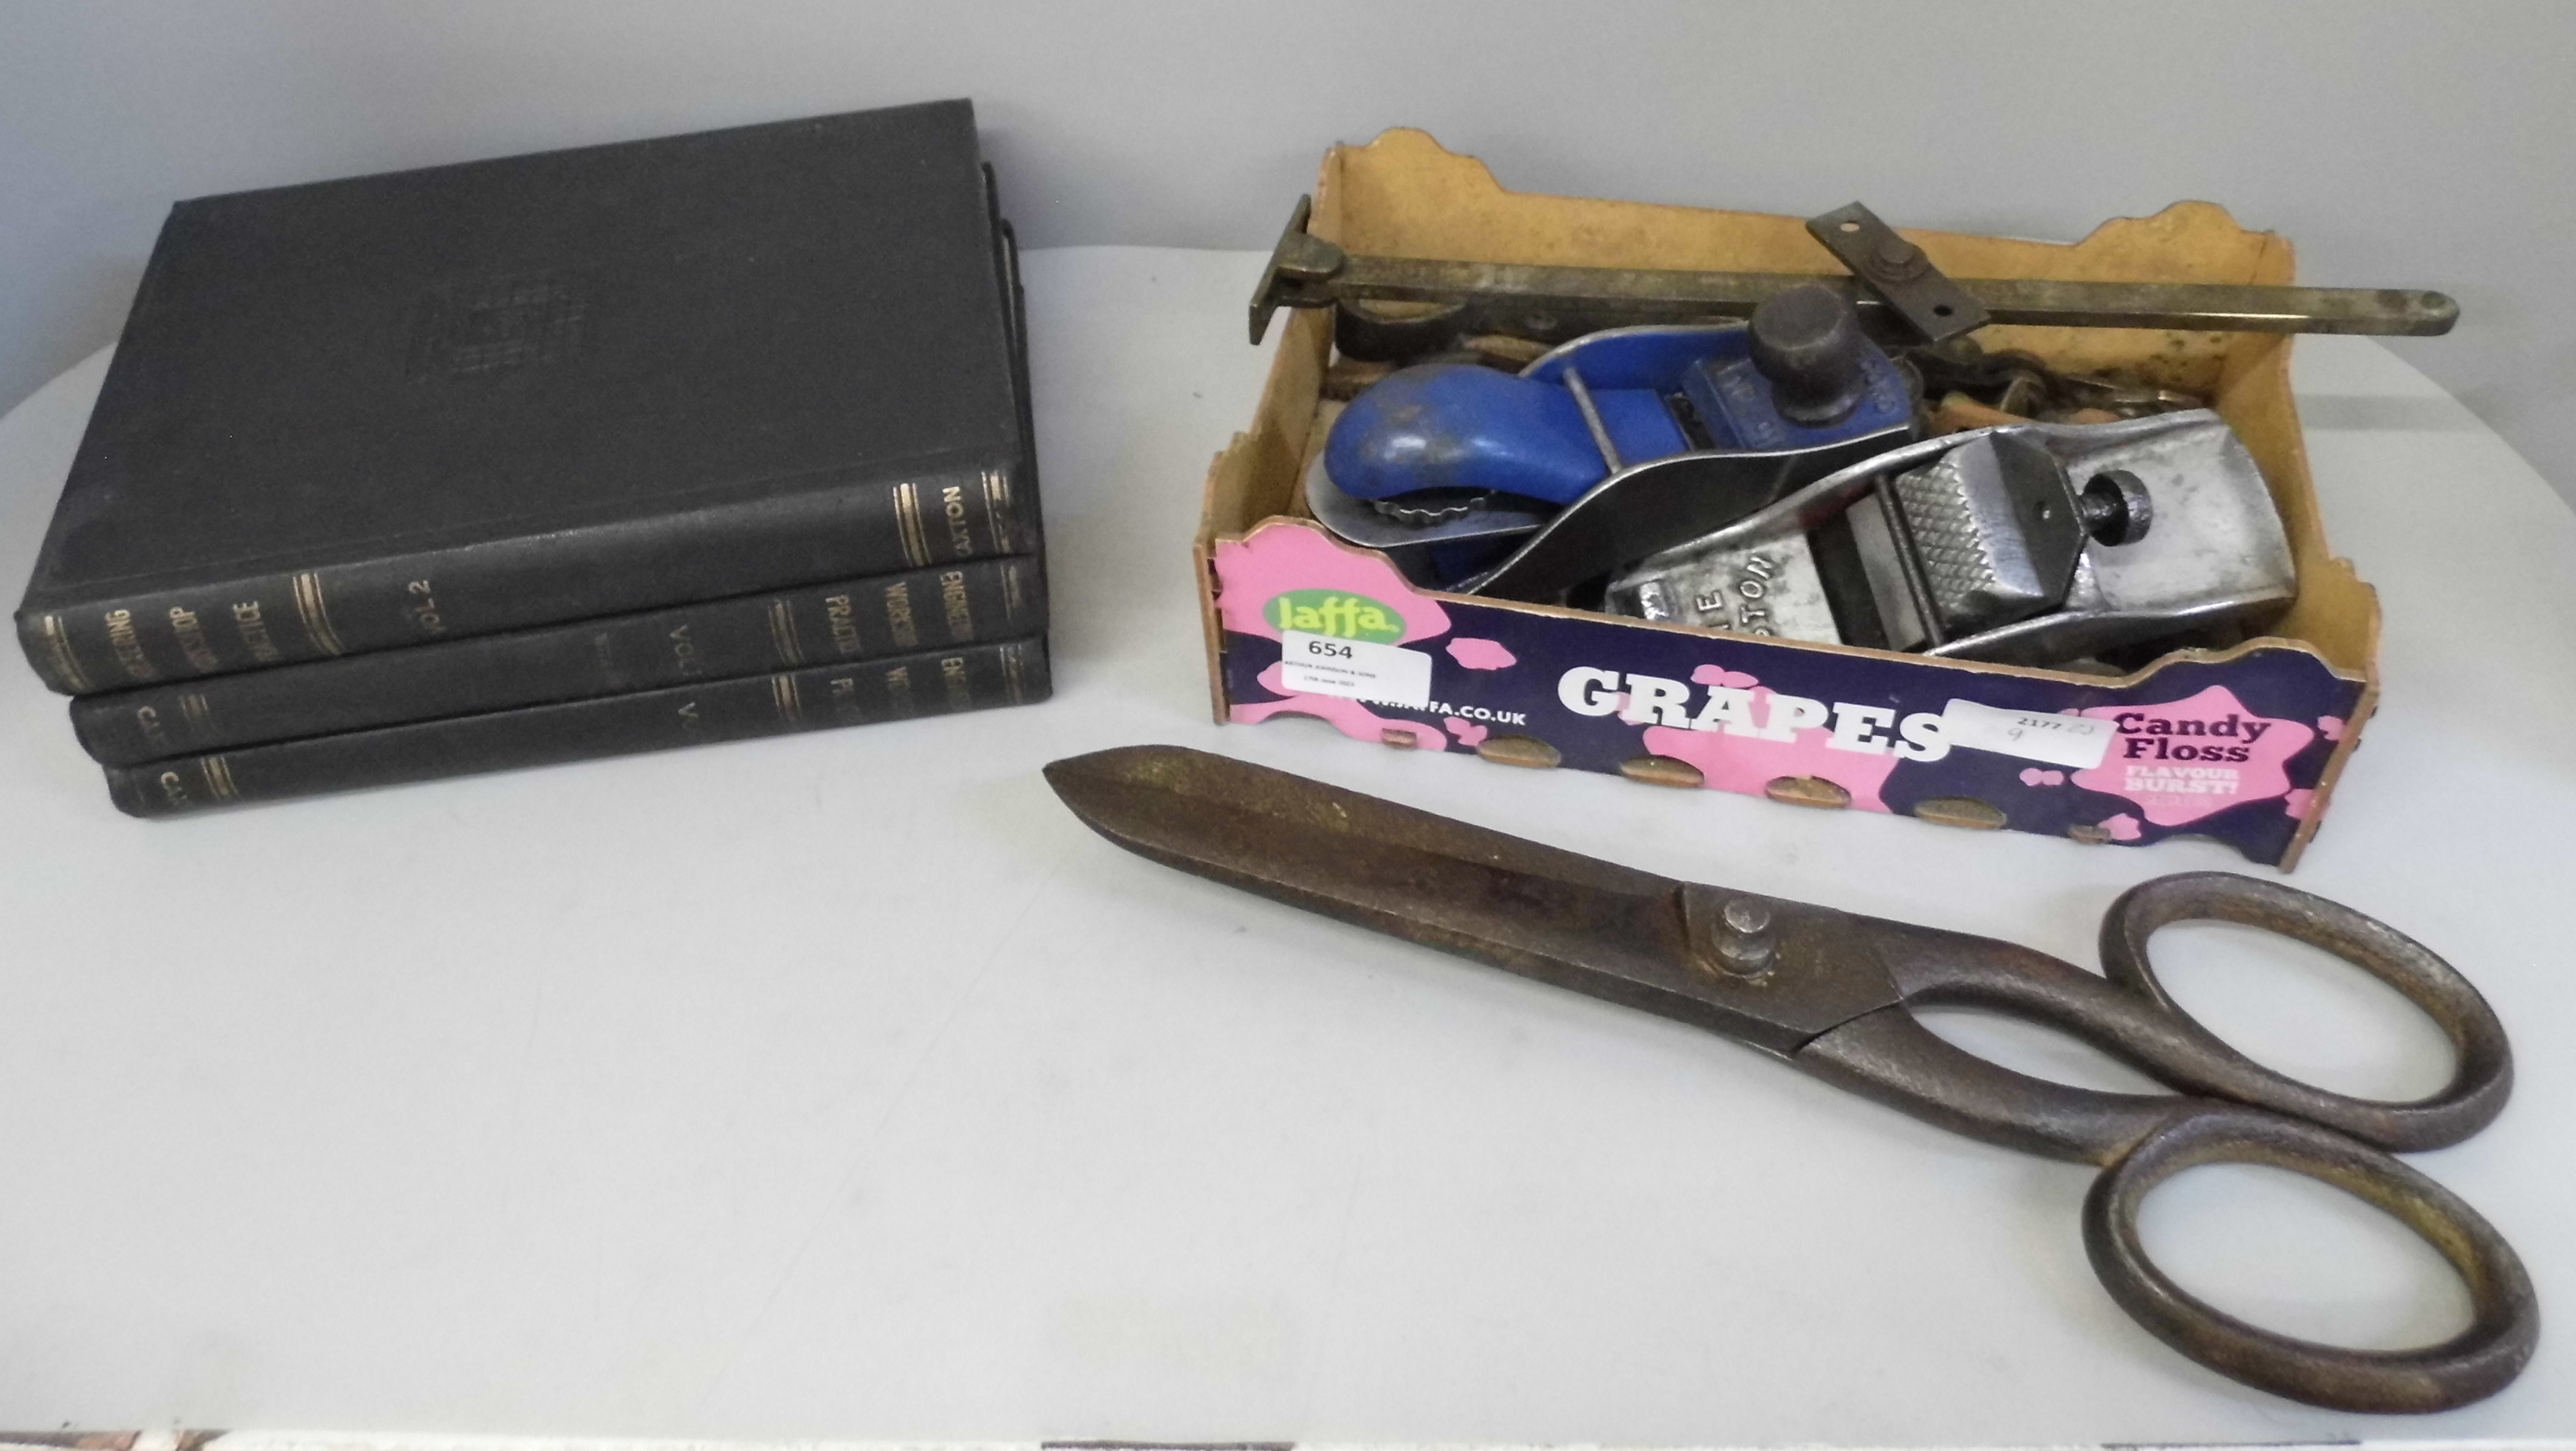 A large pair of scissors, 34cm, a collection of tools and three engineering books